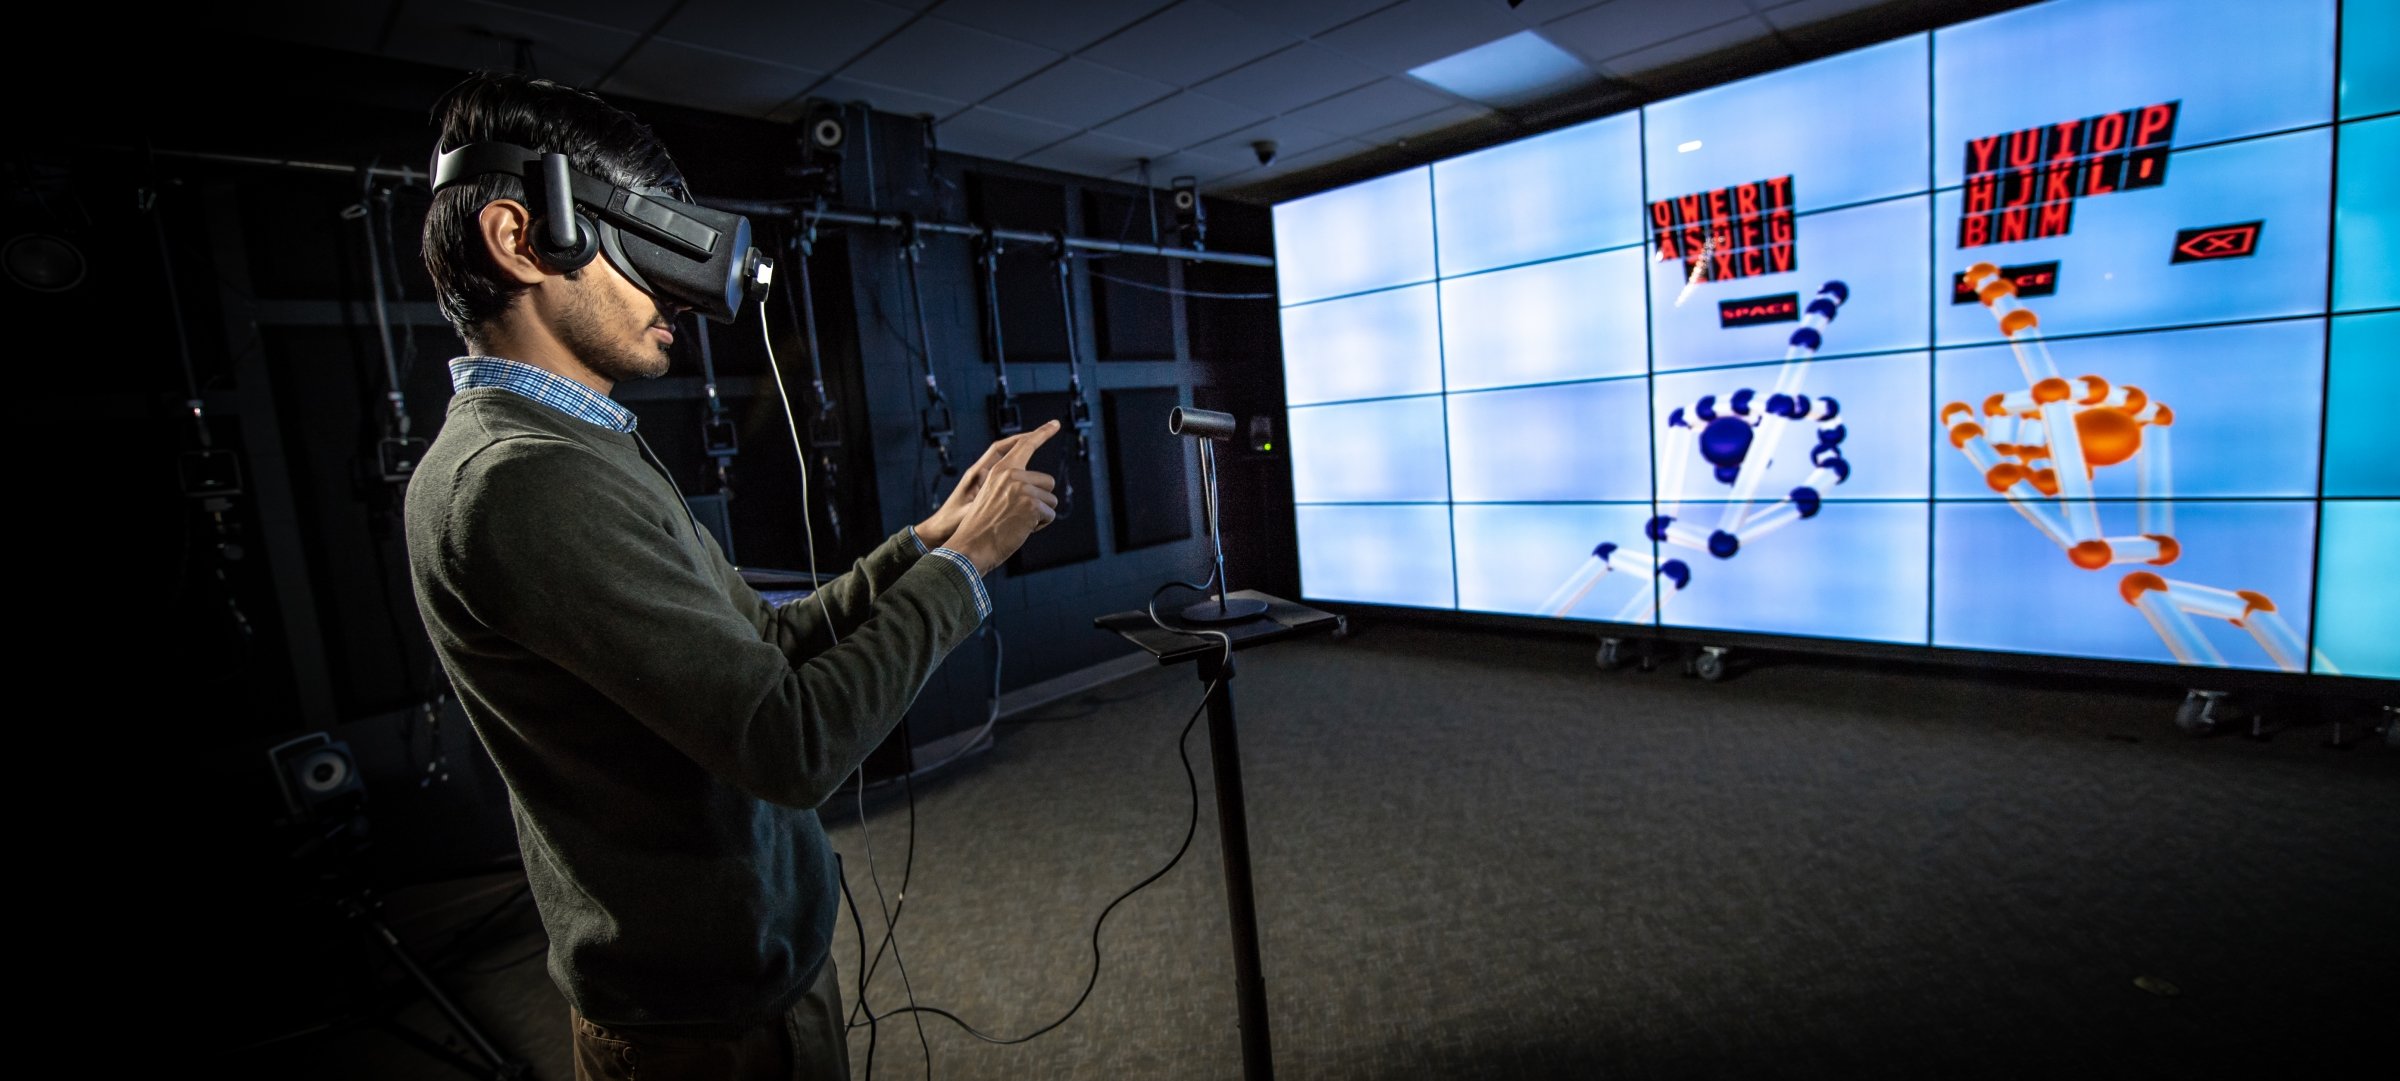 Grad Student with VR headset standing in front of large VR screen with hands raised